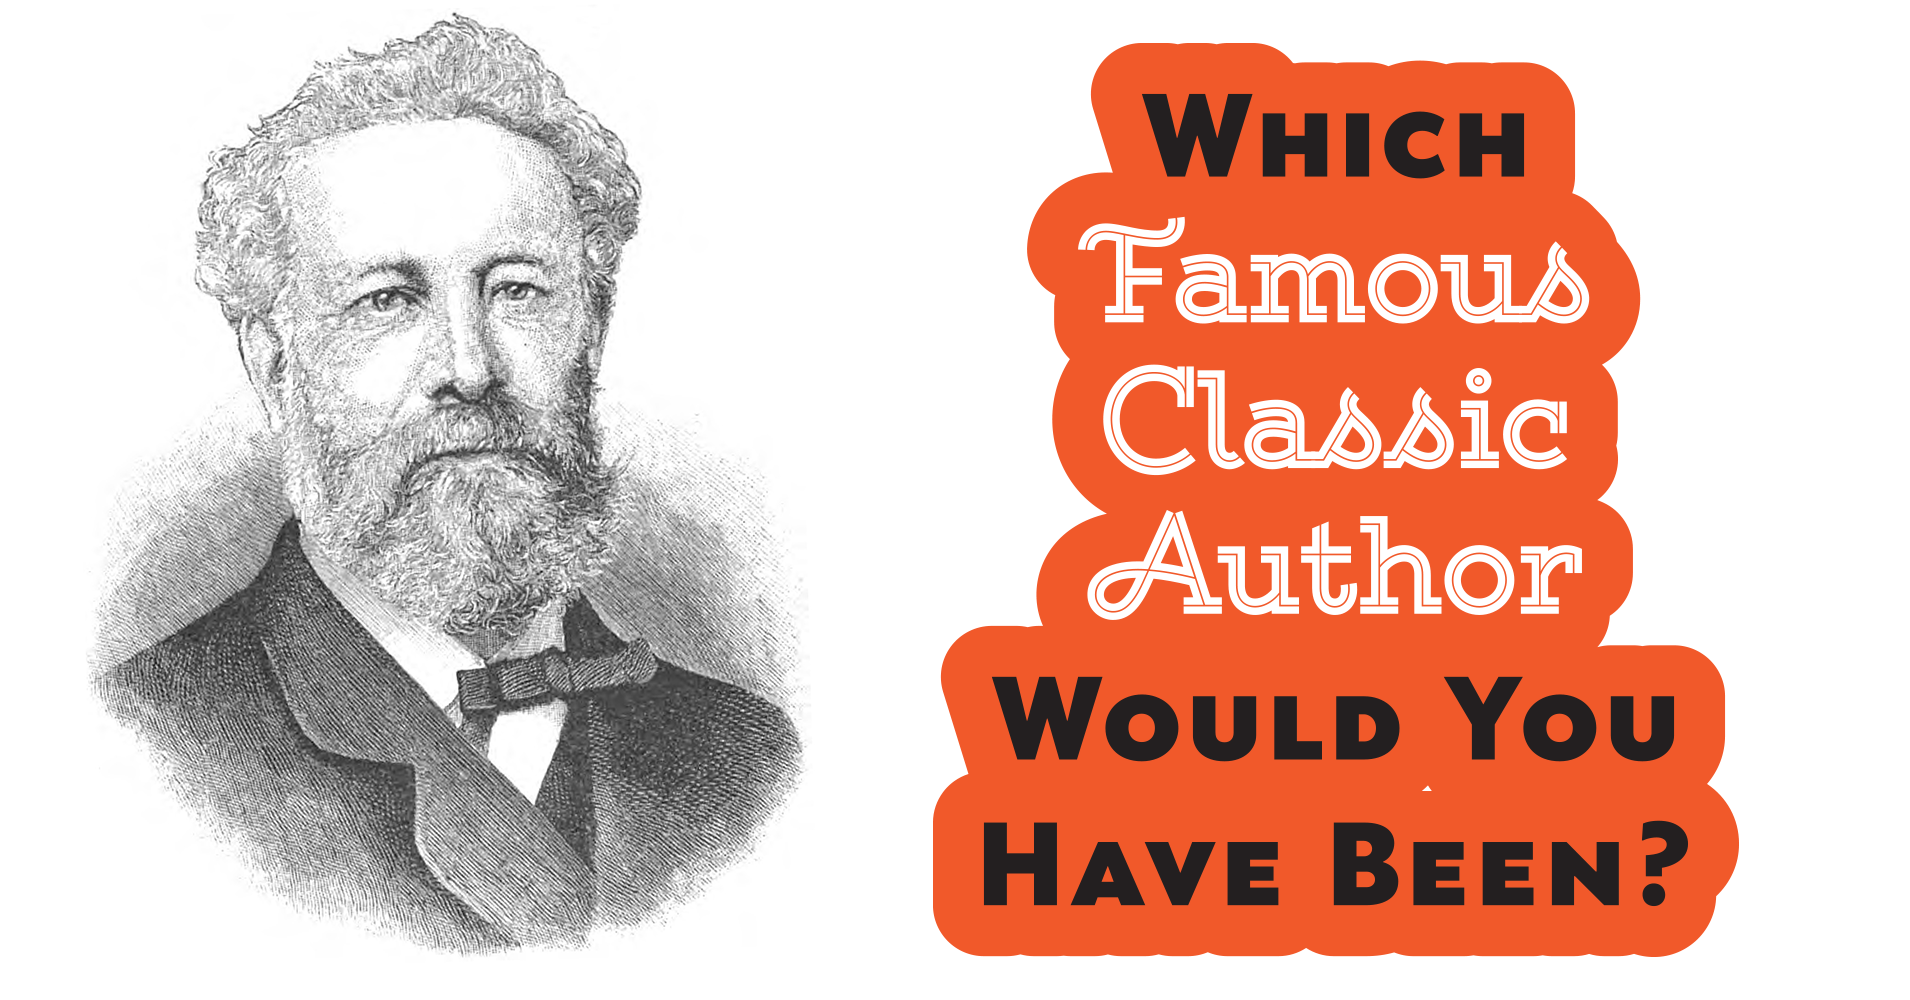 Which Famous Classic Author Would You Have Been? Question 1 - Do you